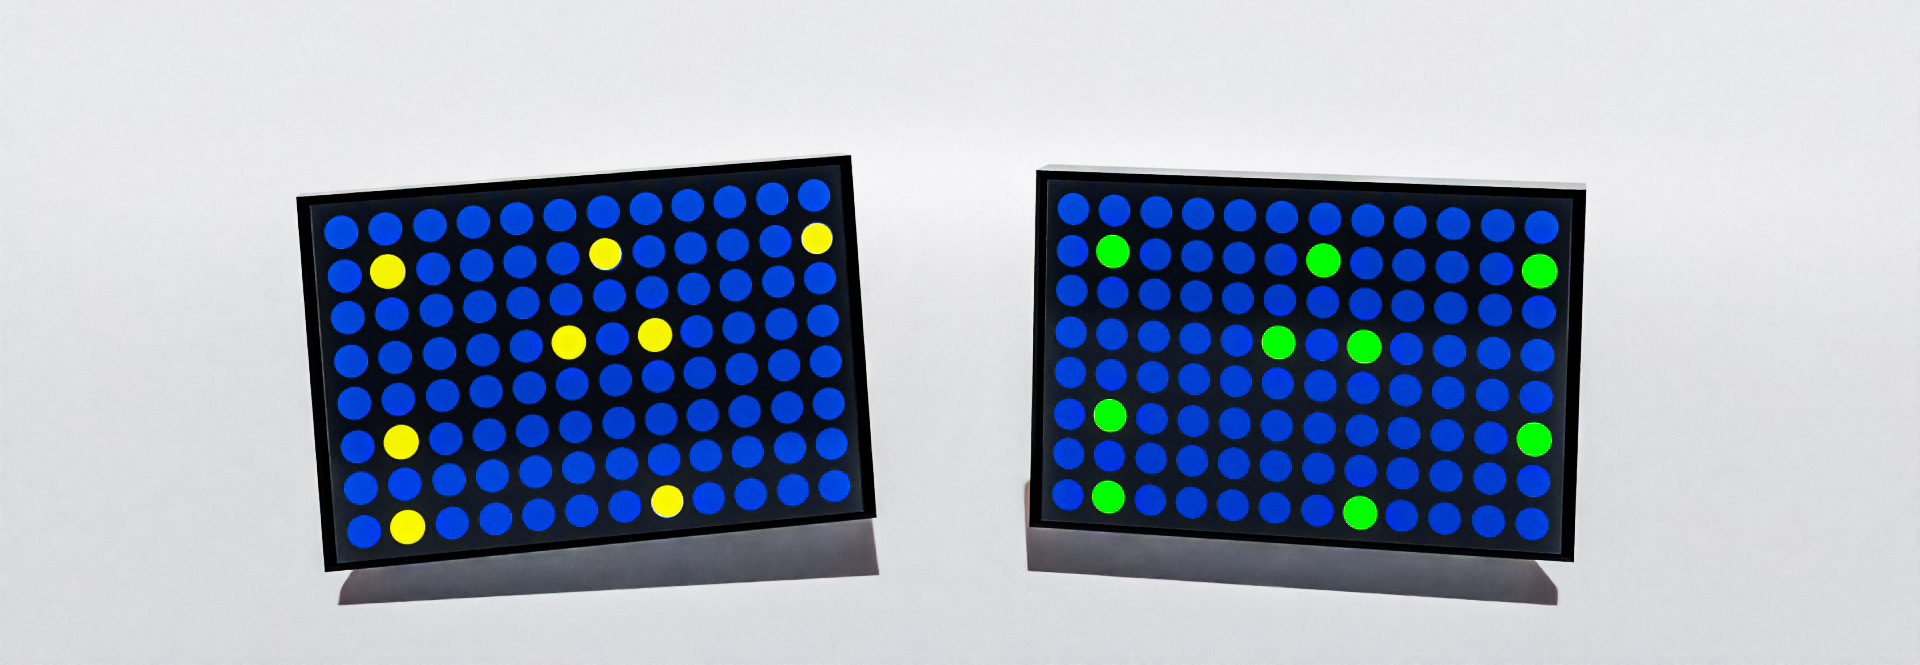 Bioactivity assessment_3D render of a multiwell plate